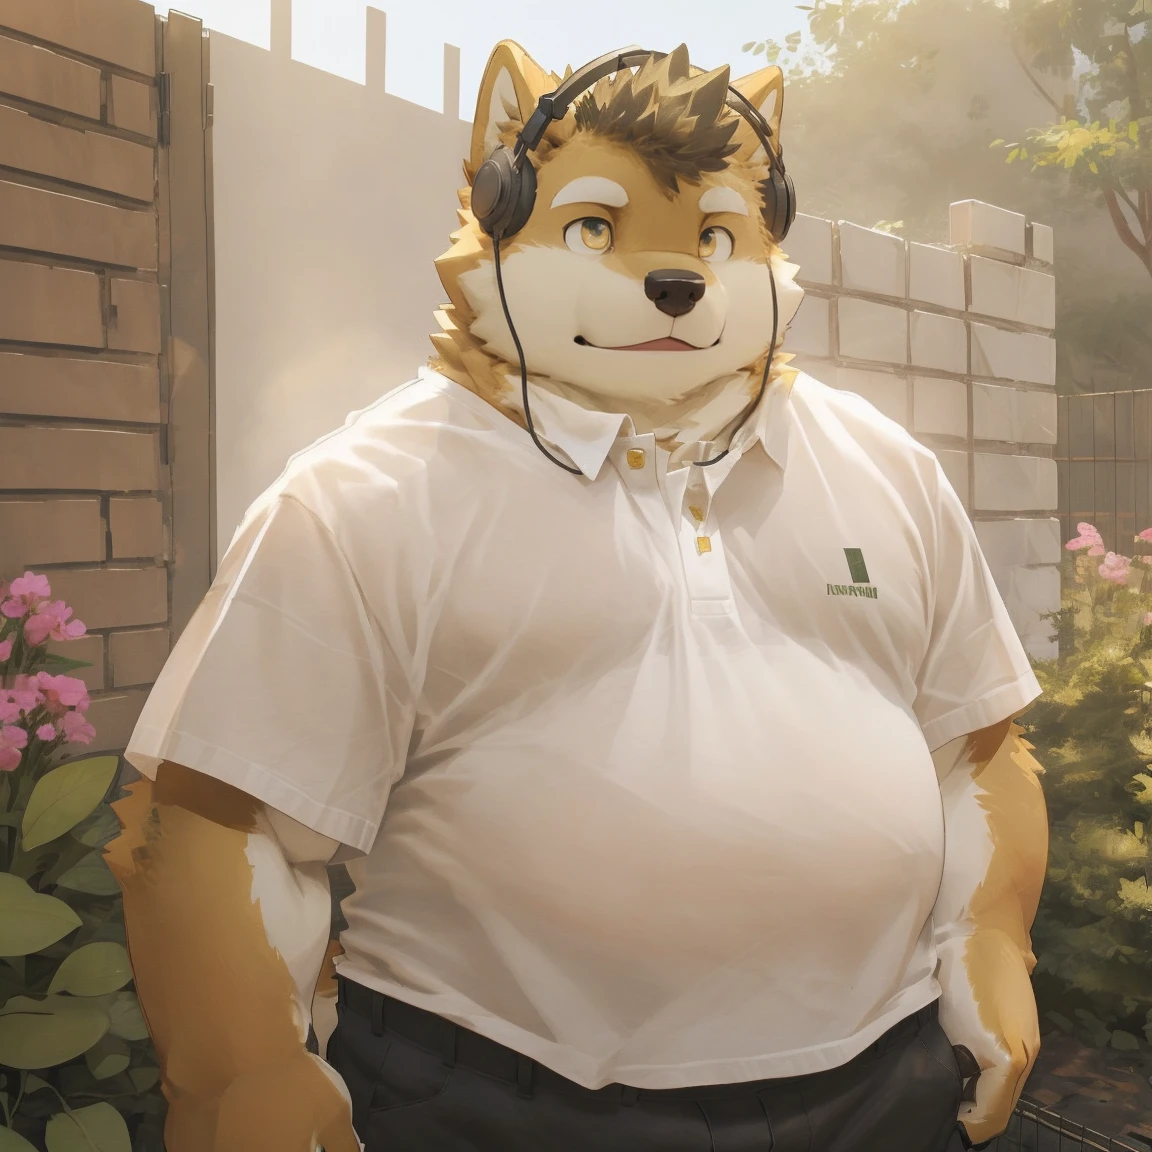 masterpiece, best quality, 8k resolution, Very detailed, hairy，Shiba Inu，(Black hair)，(((golden fur)))，(((Golden Eyes)))，Chubby，Chubby face，(((White shirt)))，(((Loose shirt)))，((Black pants))，Highest quality scene，(((Solitary)))，(((solitary)))，((Wearing headphones))，((garden))，(((Sunlight)))，(((Standing)))，(((Round face)))，(((whole body)))，(((Medium shot)))